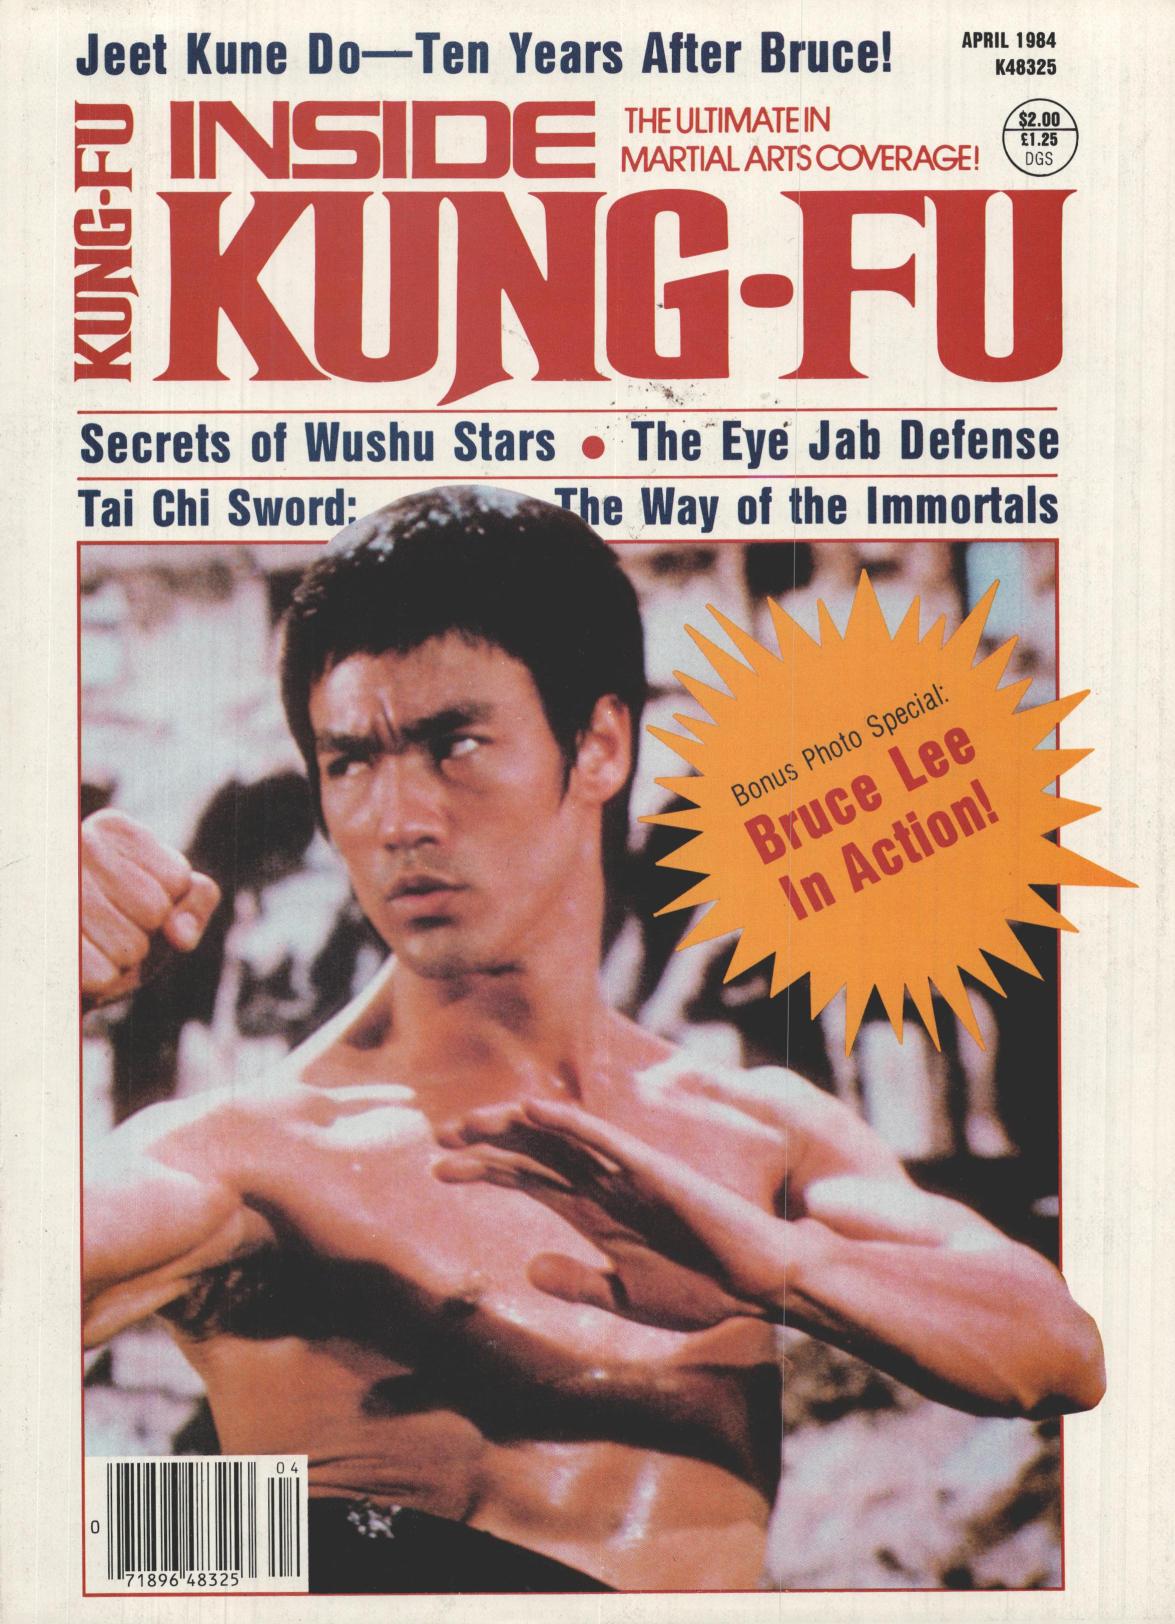 Inside Kung Fu Magazine April 1984 84/04   *COLLECTIBLE*